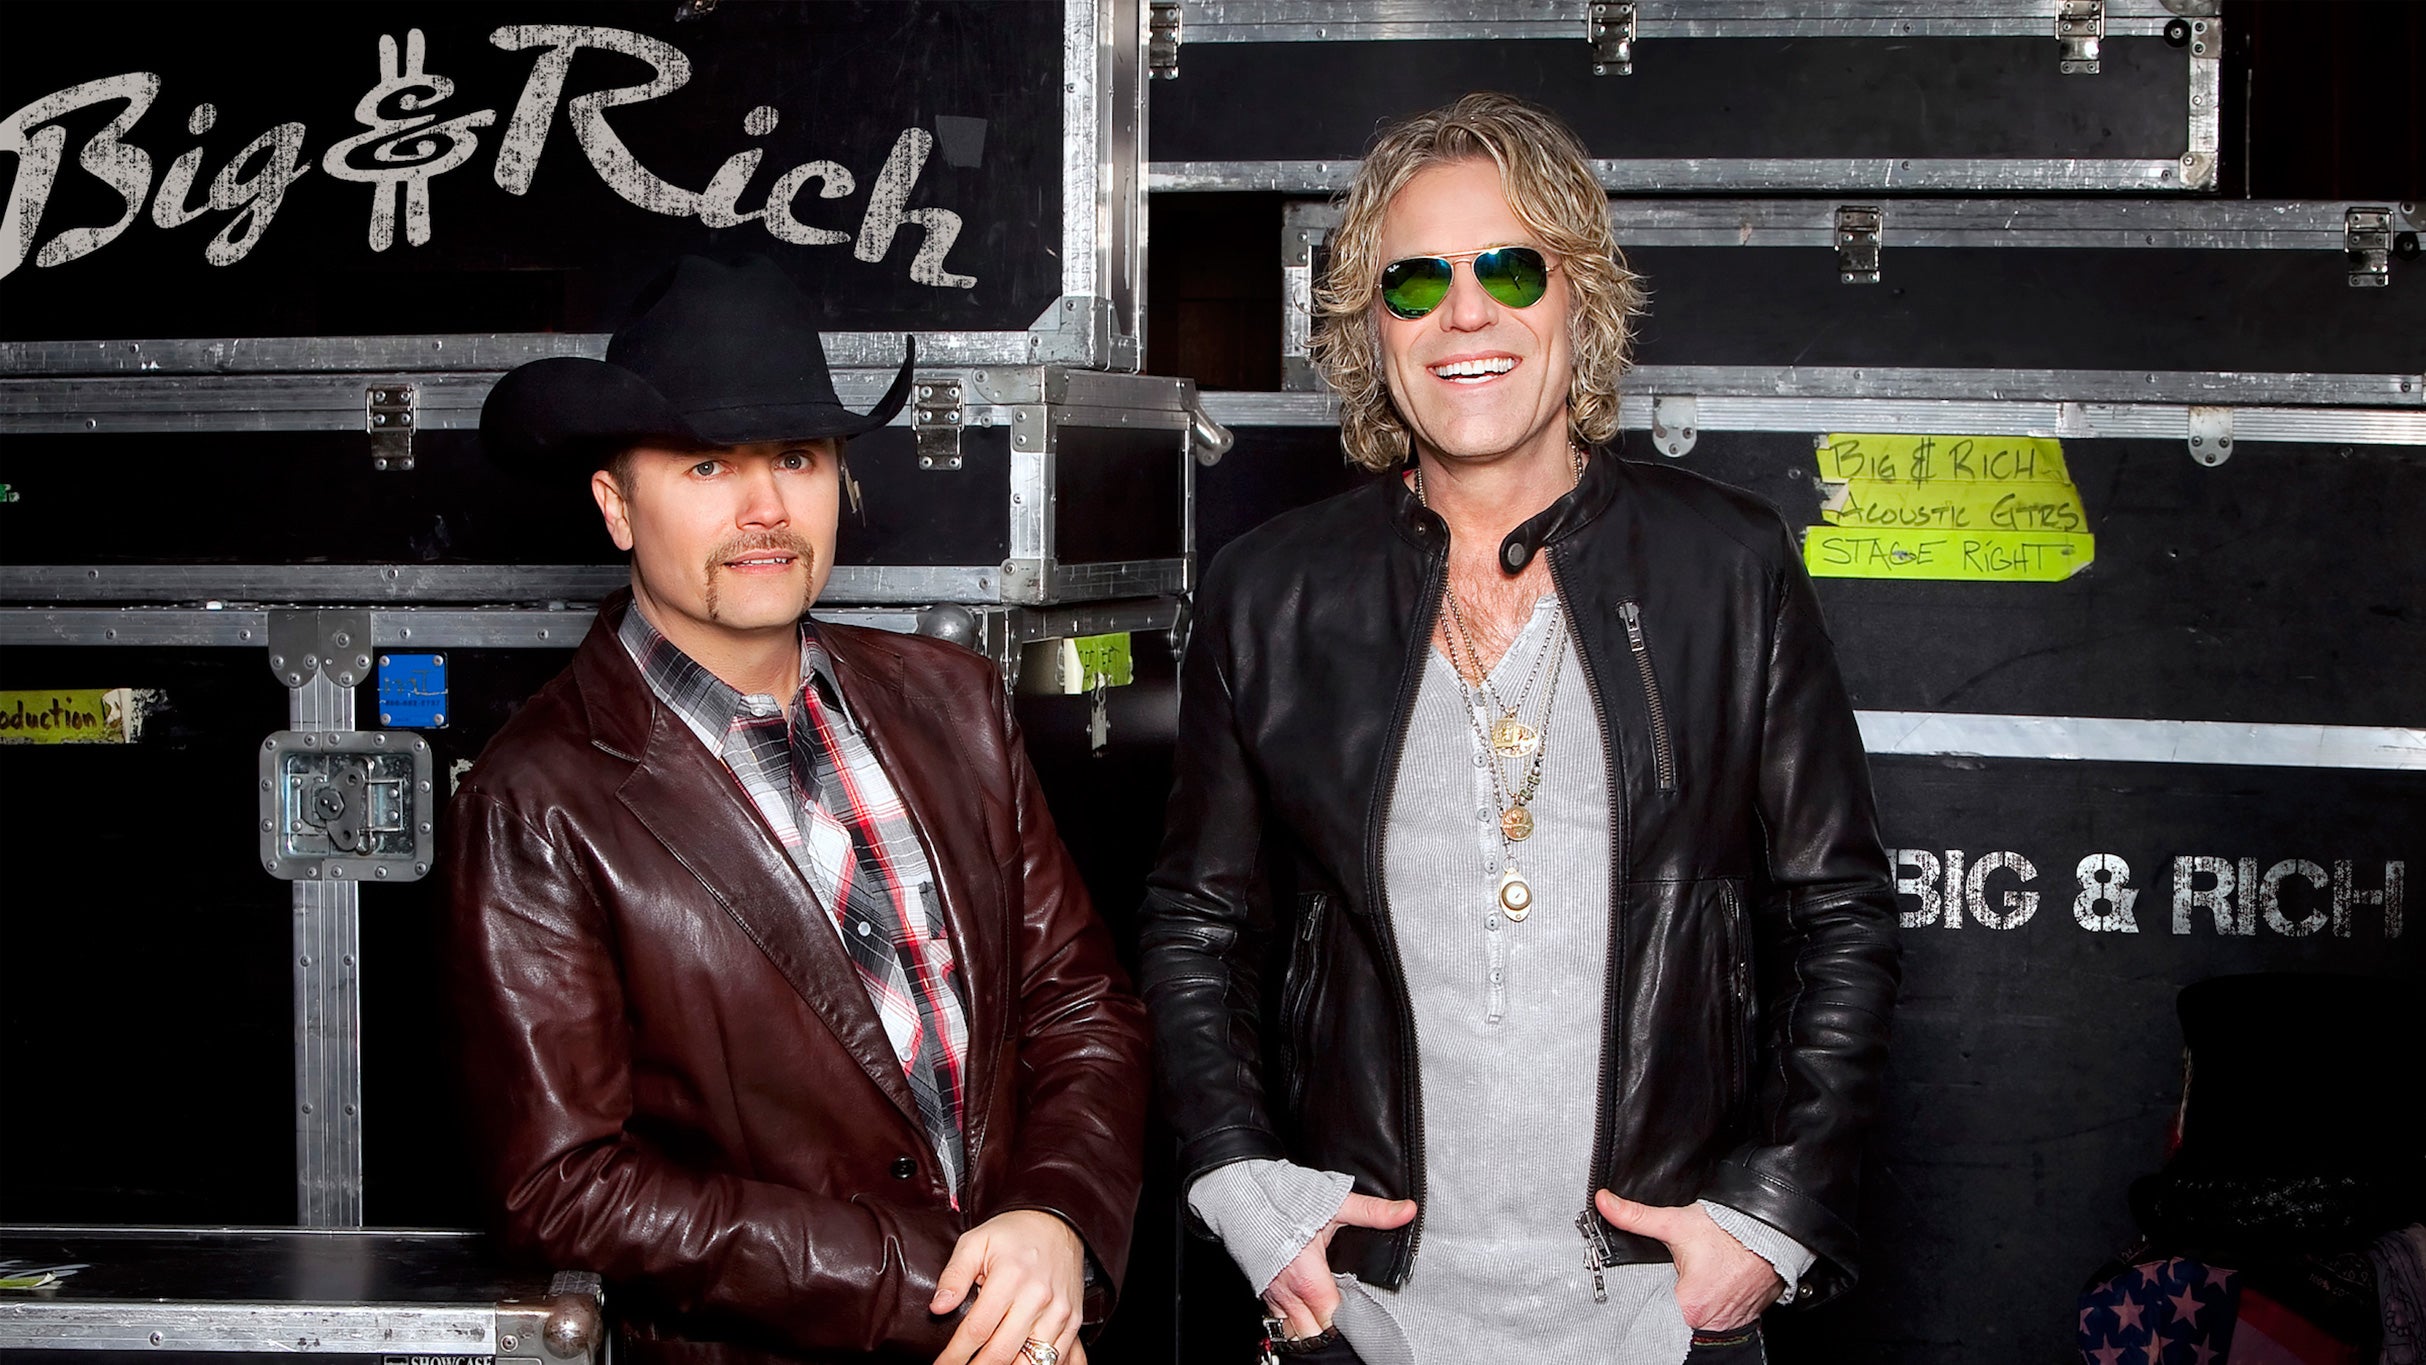 Big & Rich with Gretchen Wilson in Mashantucket promo photo for Official Platinum Onsale presale offer code